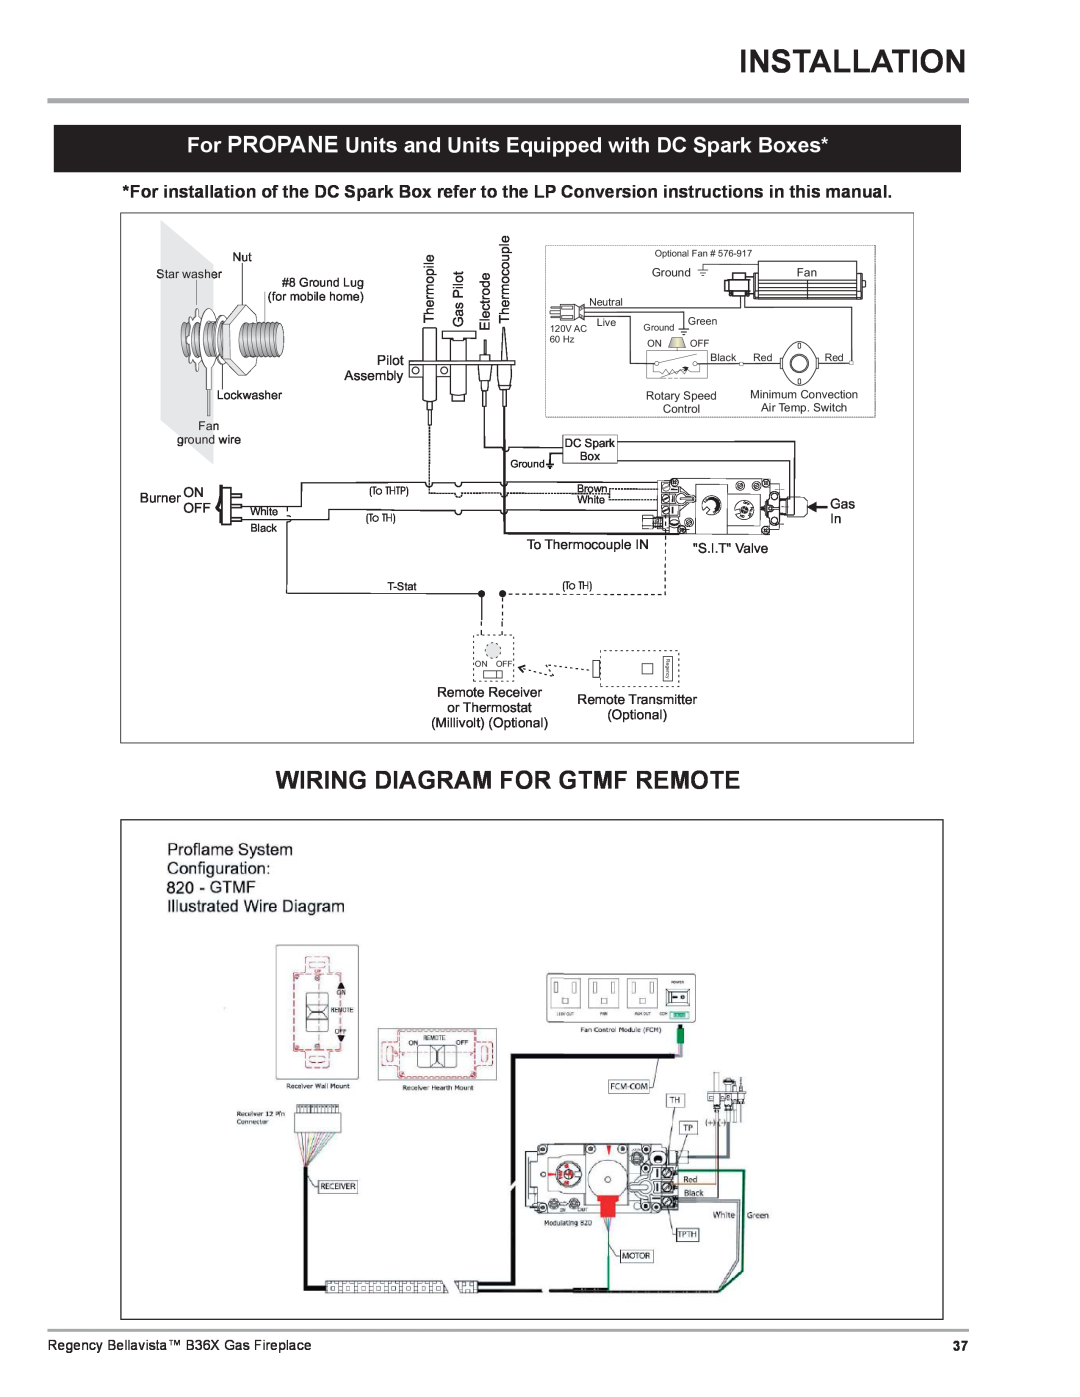 Regency B36X Installation, Wiring Diagram For Gtmf Remote, Thermopile, Thermocouple, GasPilot, Electrode, Assembly, Burner 